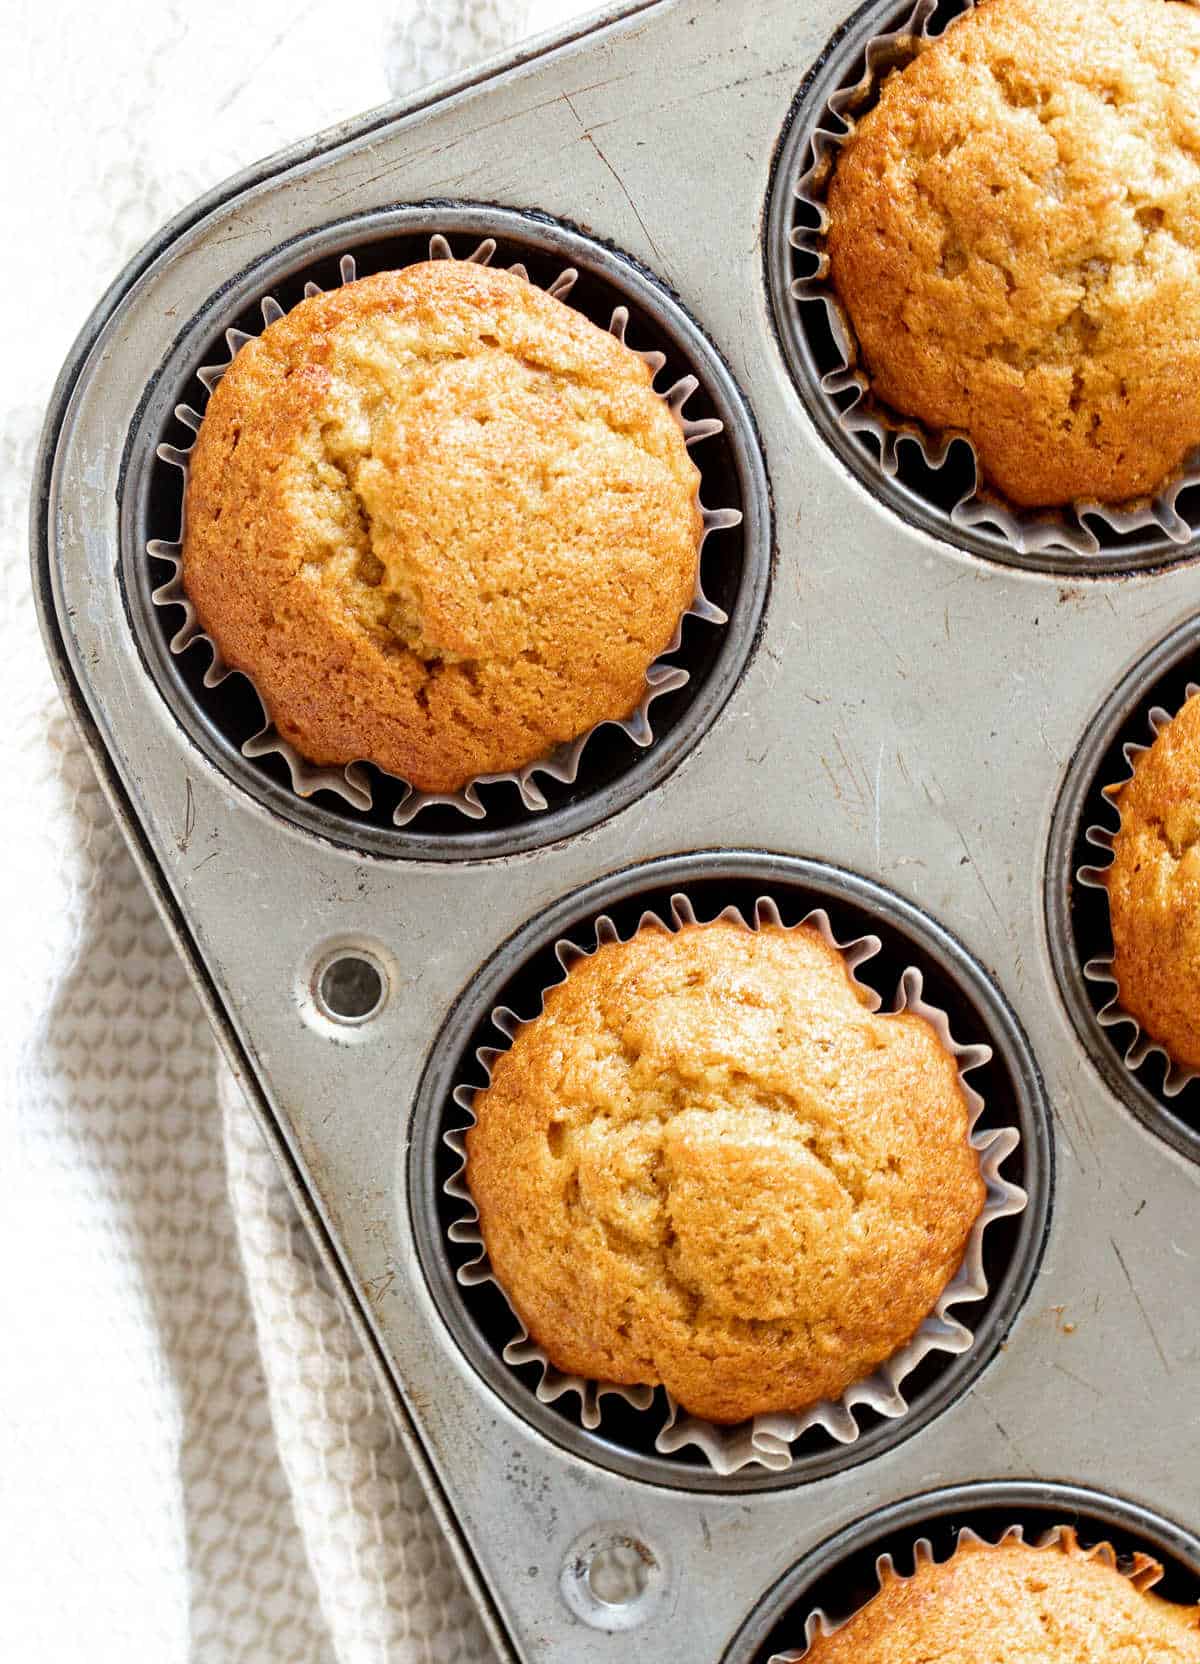 Baked pumpkin banana muffins in the metal tin on a white cloth.